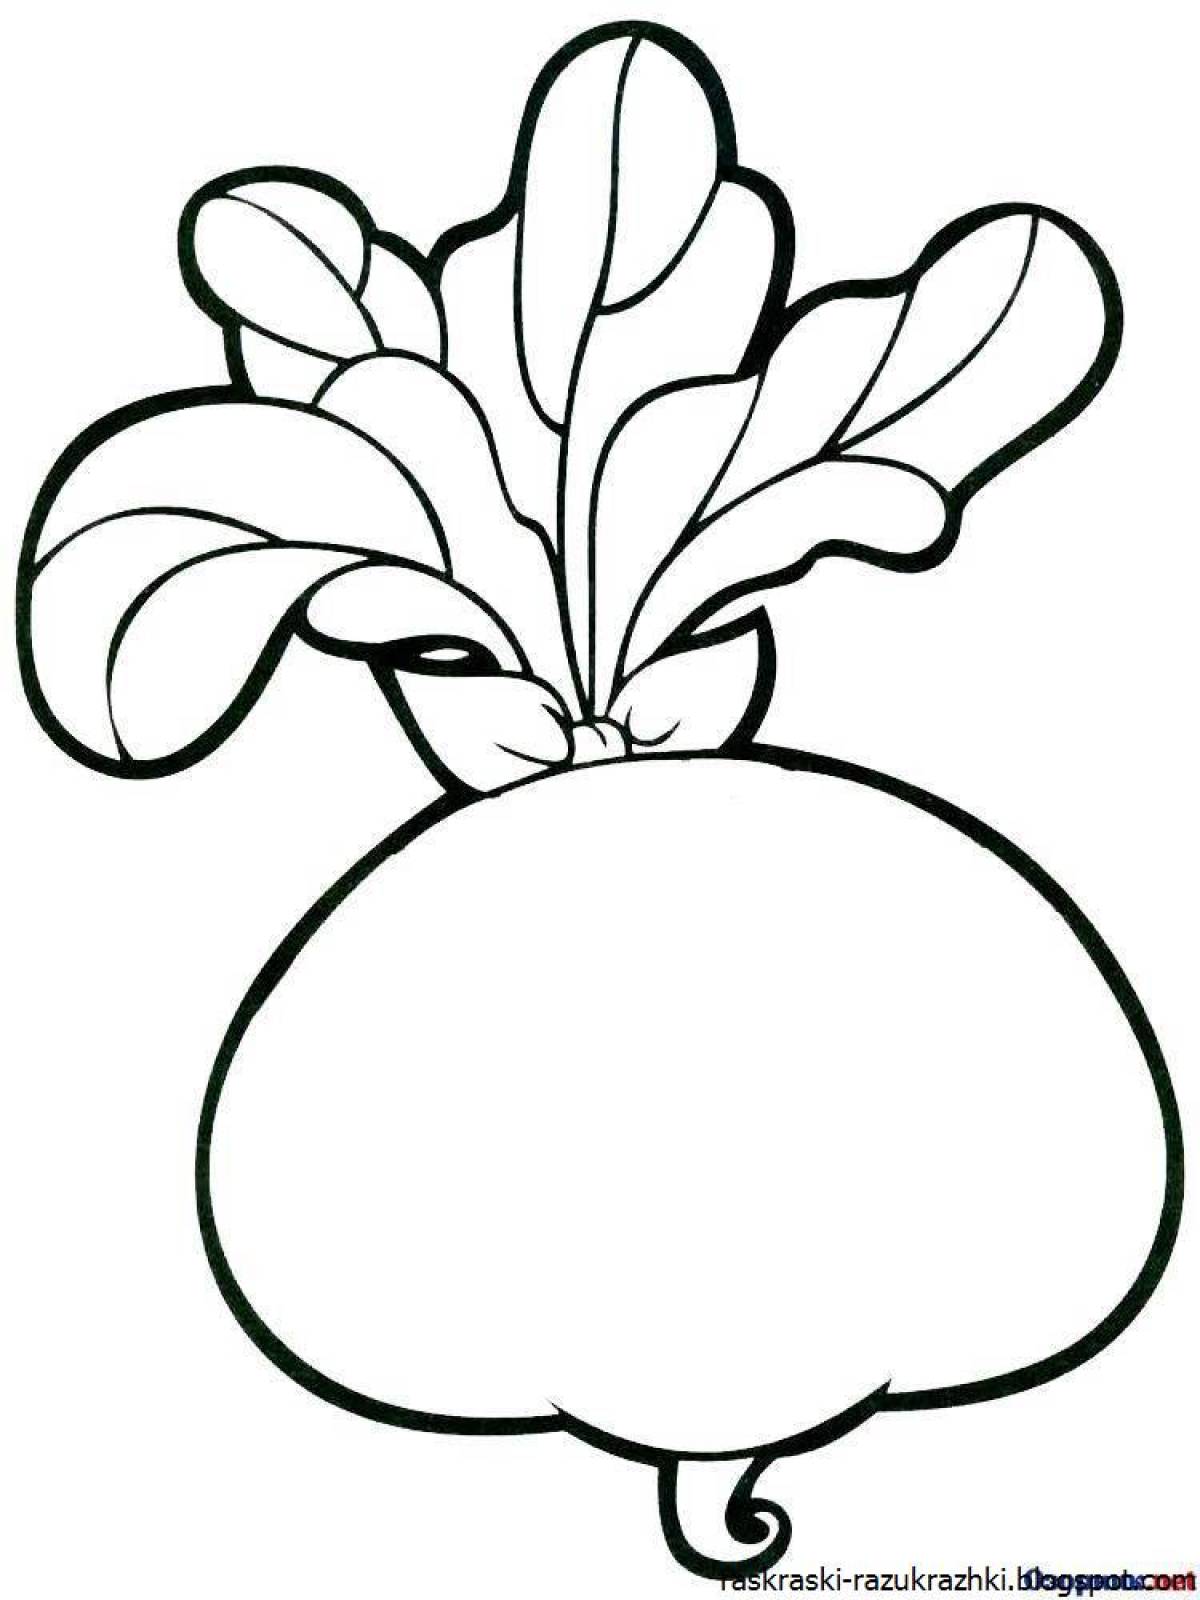 Great turnip coloring book for kids